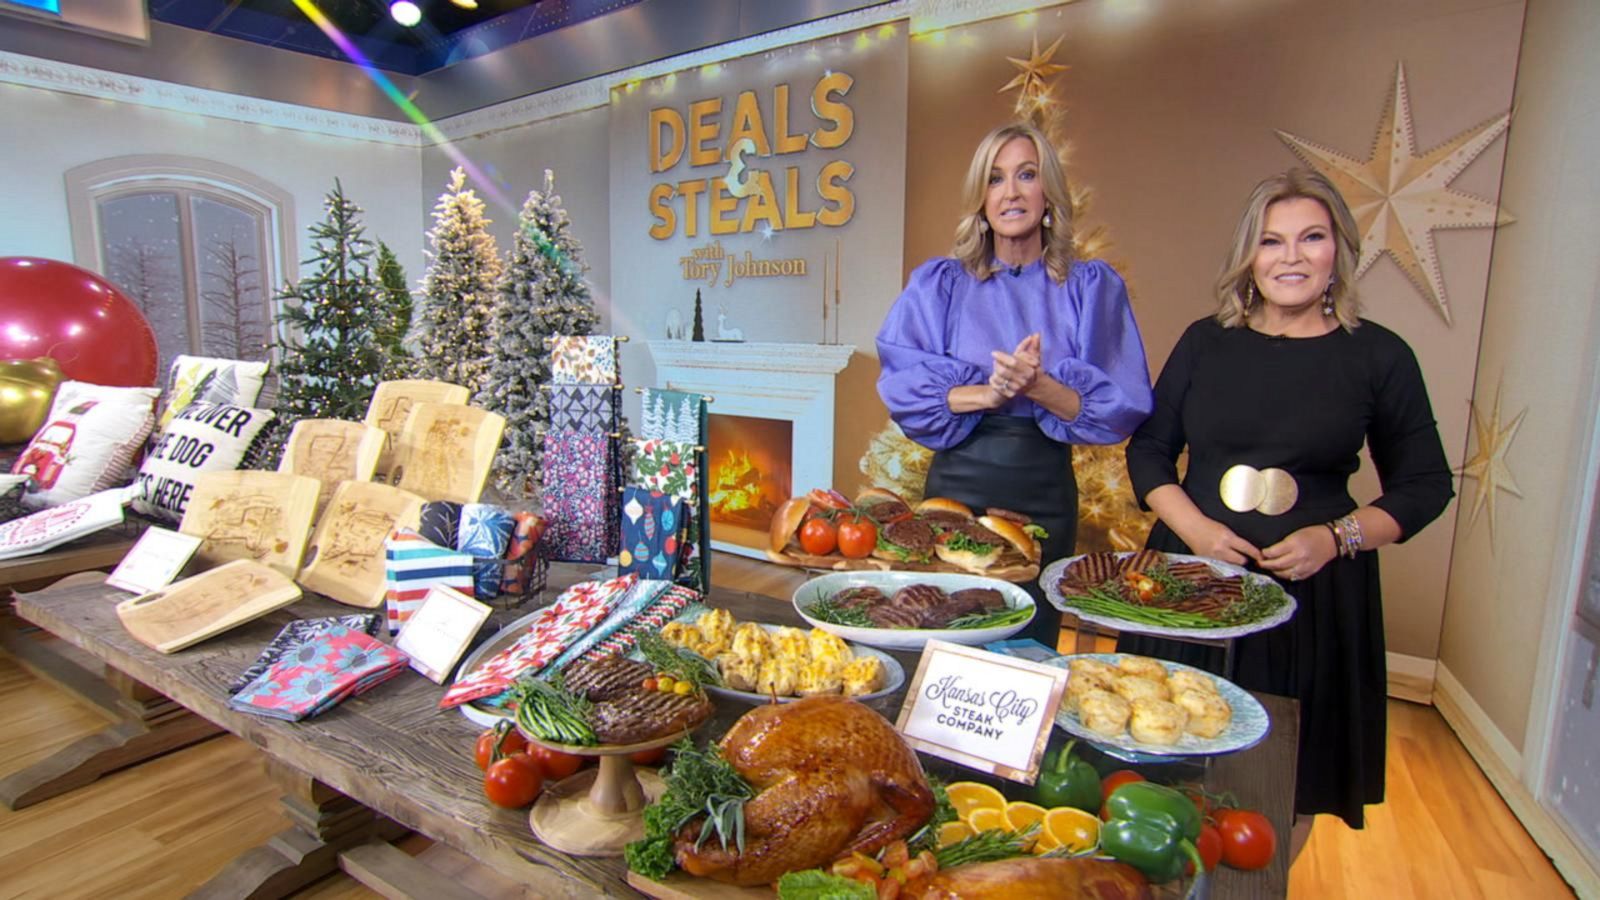 Deals and Steals for holiday entertaining Good Morning America